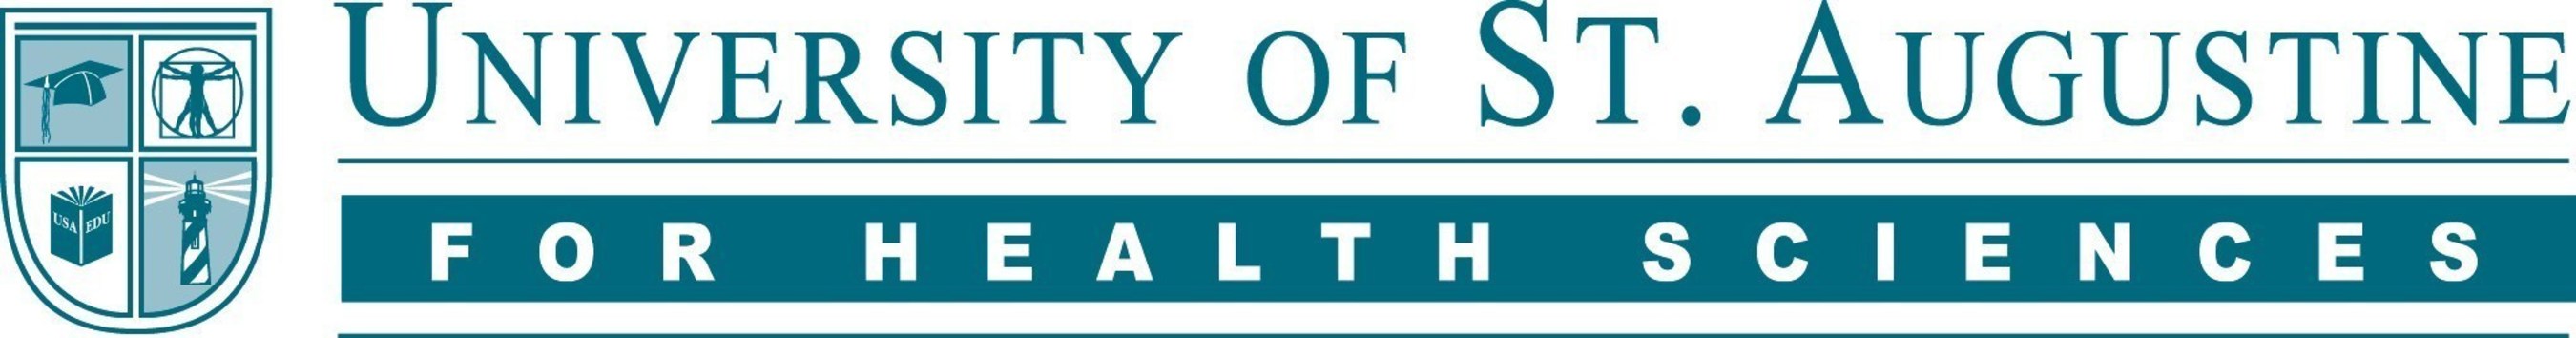 The University of St. Augustine for Health Sciences (USAHS) is a graduate institution that emphasizes health science education through innovative quality classroom and distance education. Founded in 1979, USAHS has locations in San Marcos, California; St. Augustine, Florida; Austin, Texas and Miami, Florida. USAHS offers degree programs in physical therapy, occupational therapy, nursing, education and health science, as well as continuing education programs. For more information, visit  www.usa.edu . USAHS is a member of Laureate International Universities, a network of more than 80 institutions in 28 countries and one of the most significant global higher education providers for health sciences. (PRNewsFoto/University of St. Augustine for)